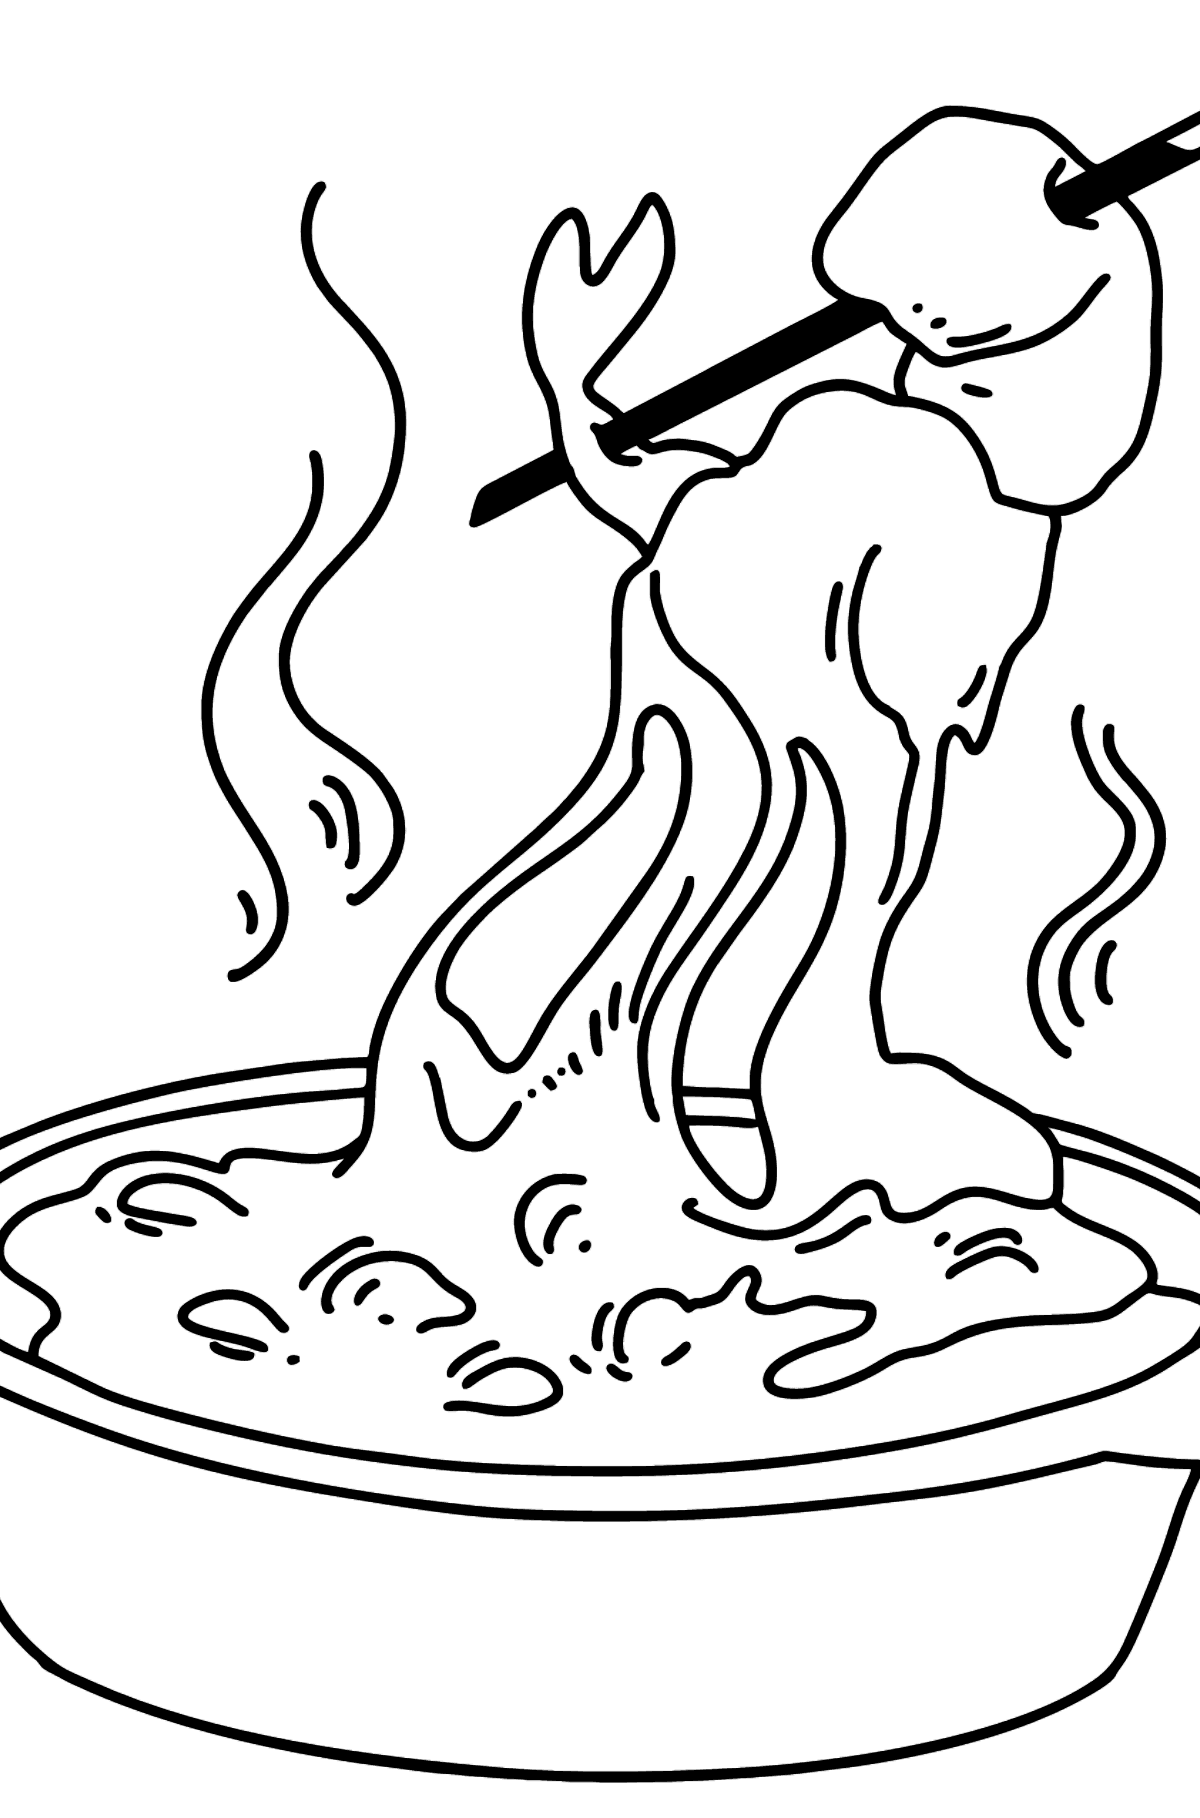 Fondue coloring page - Coloring Pages for Kids